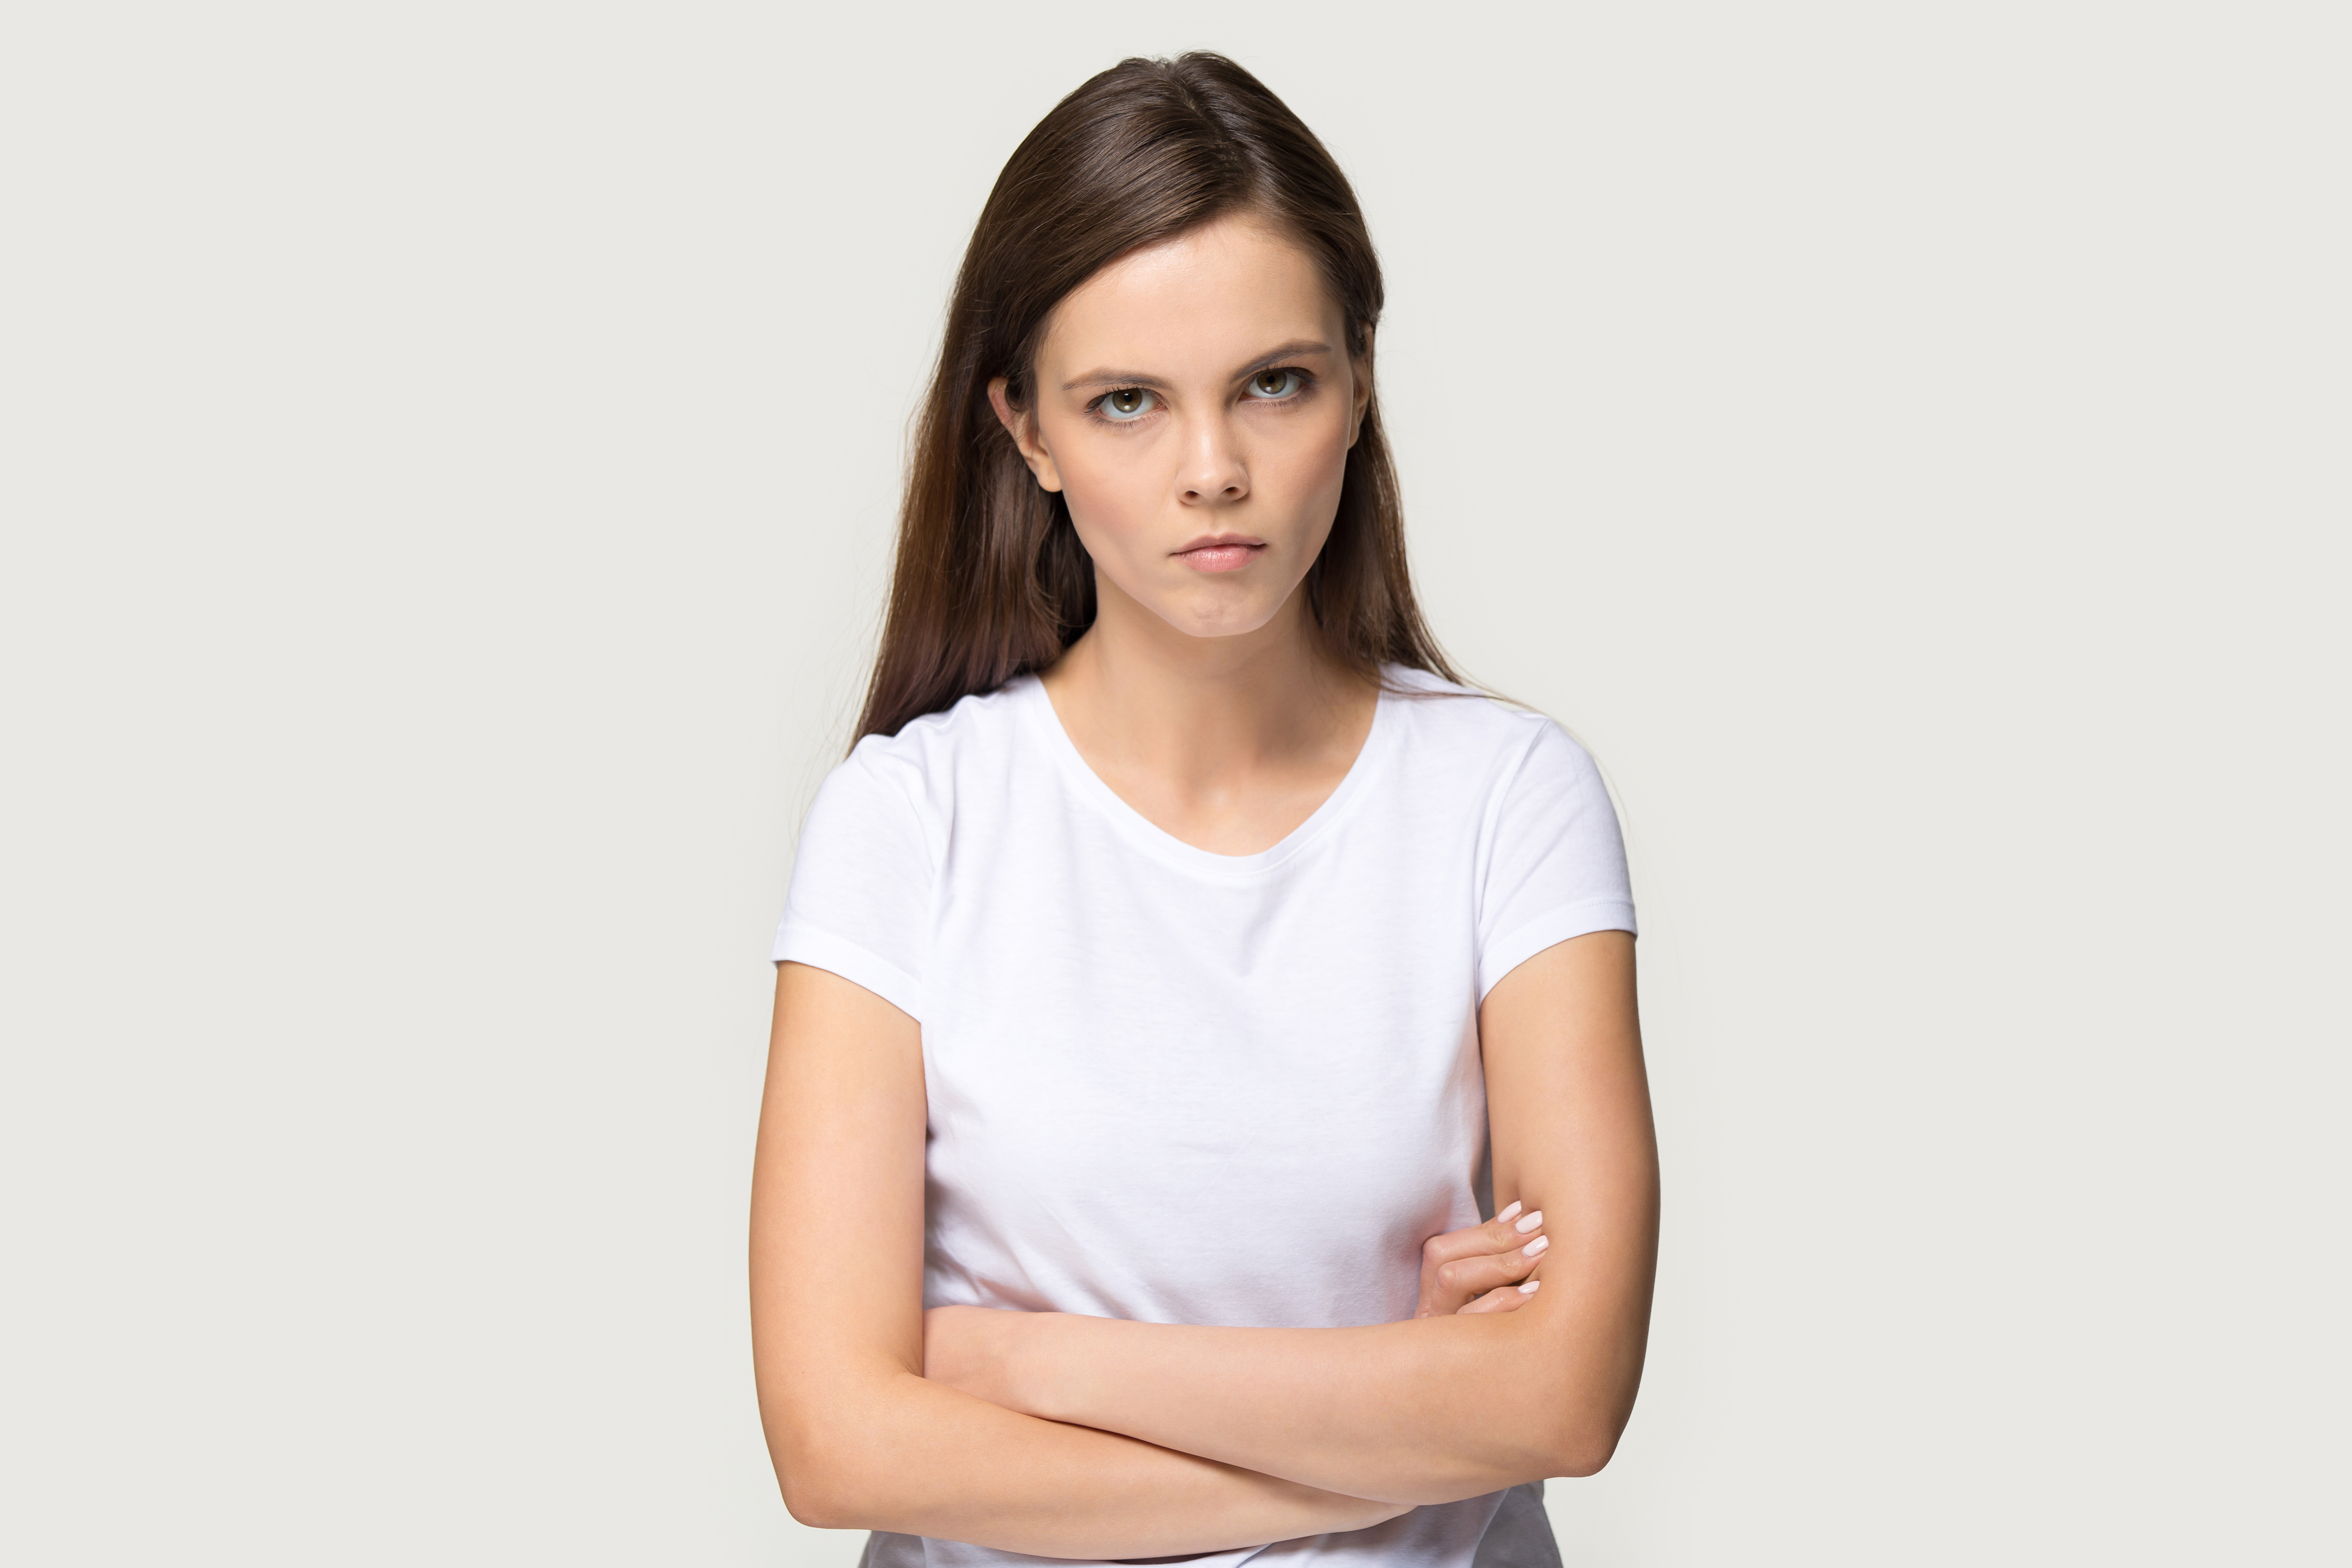 A young woman looking skeptical | Source: Shutterstock